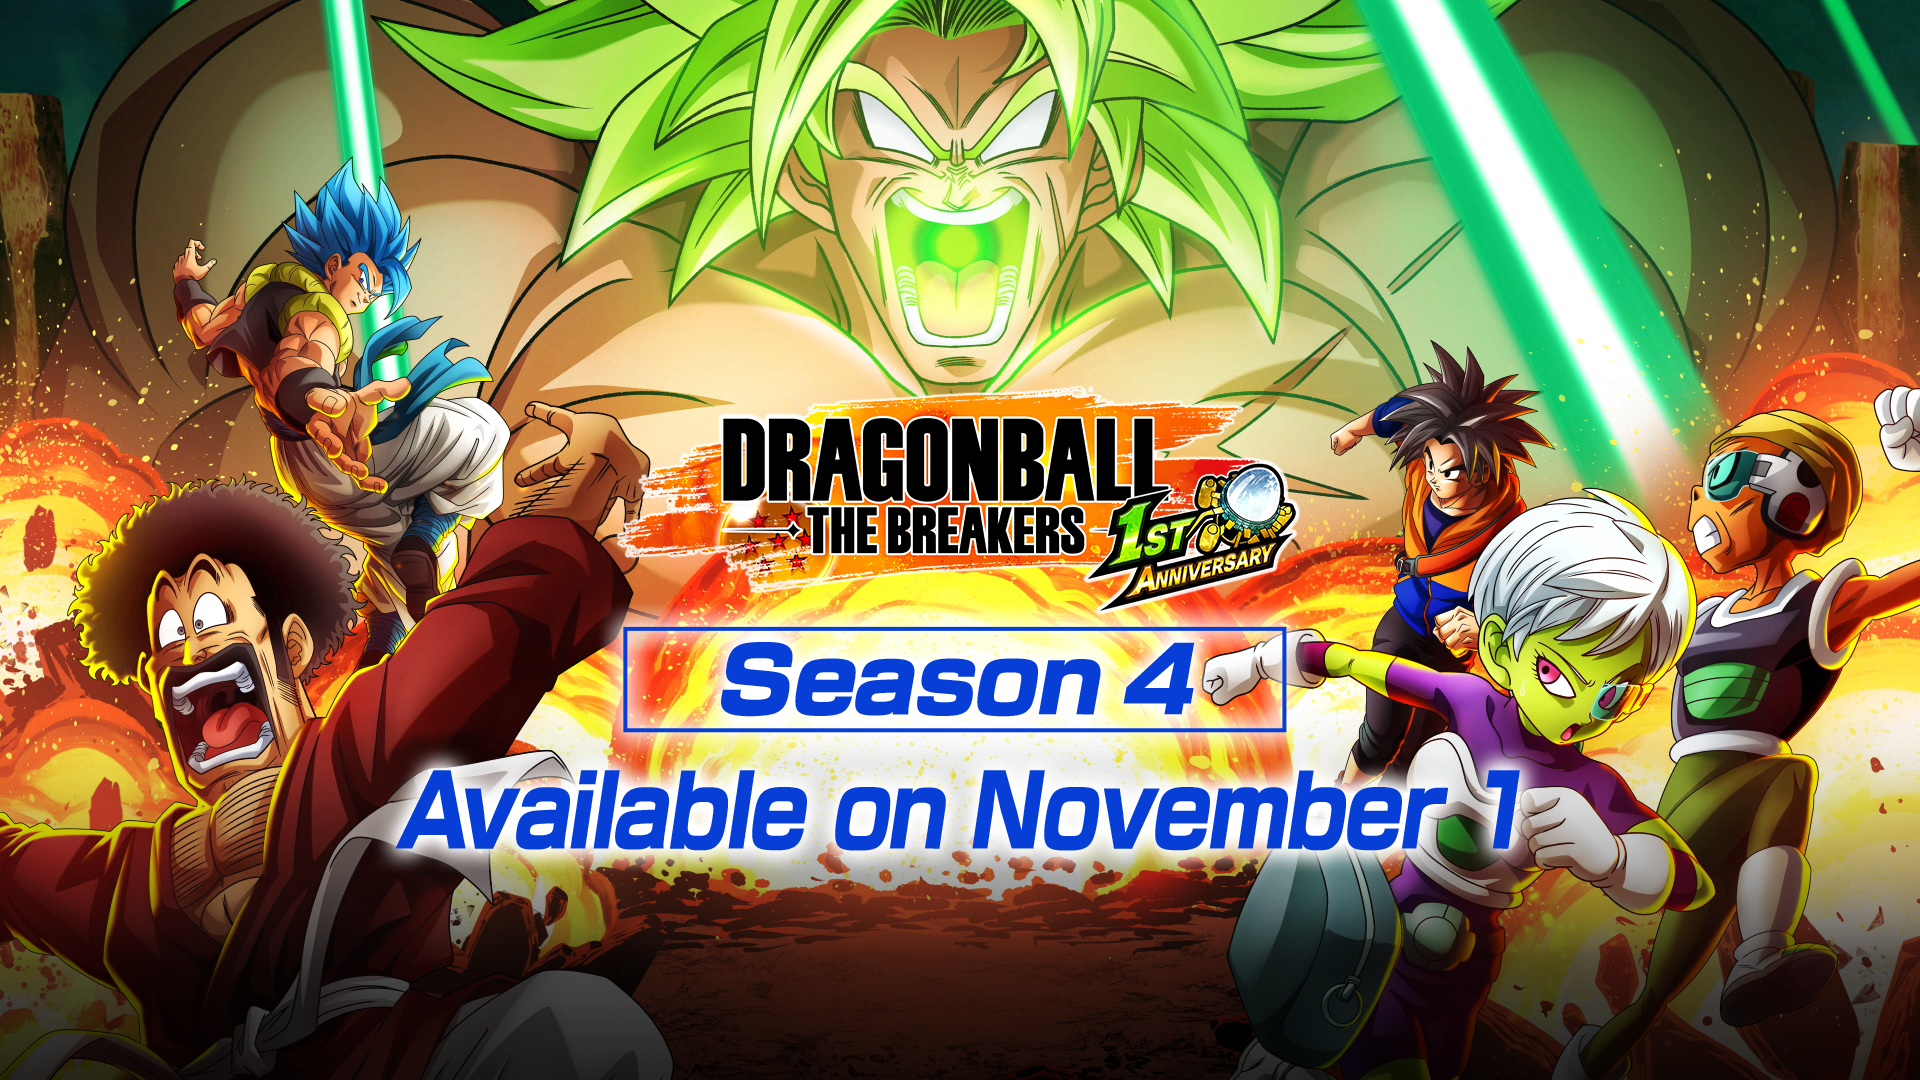 Dragon Ball: The Breakers - Patch Notes 2.5